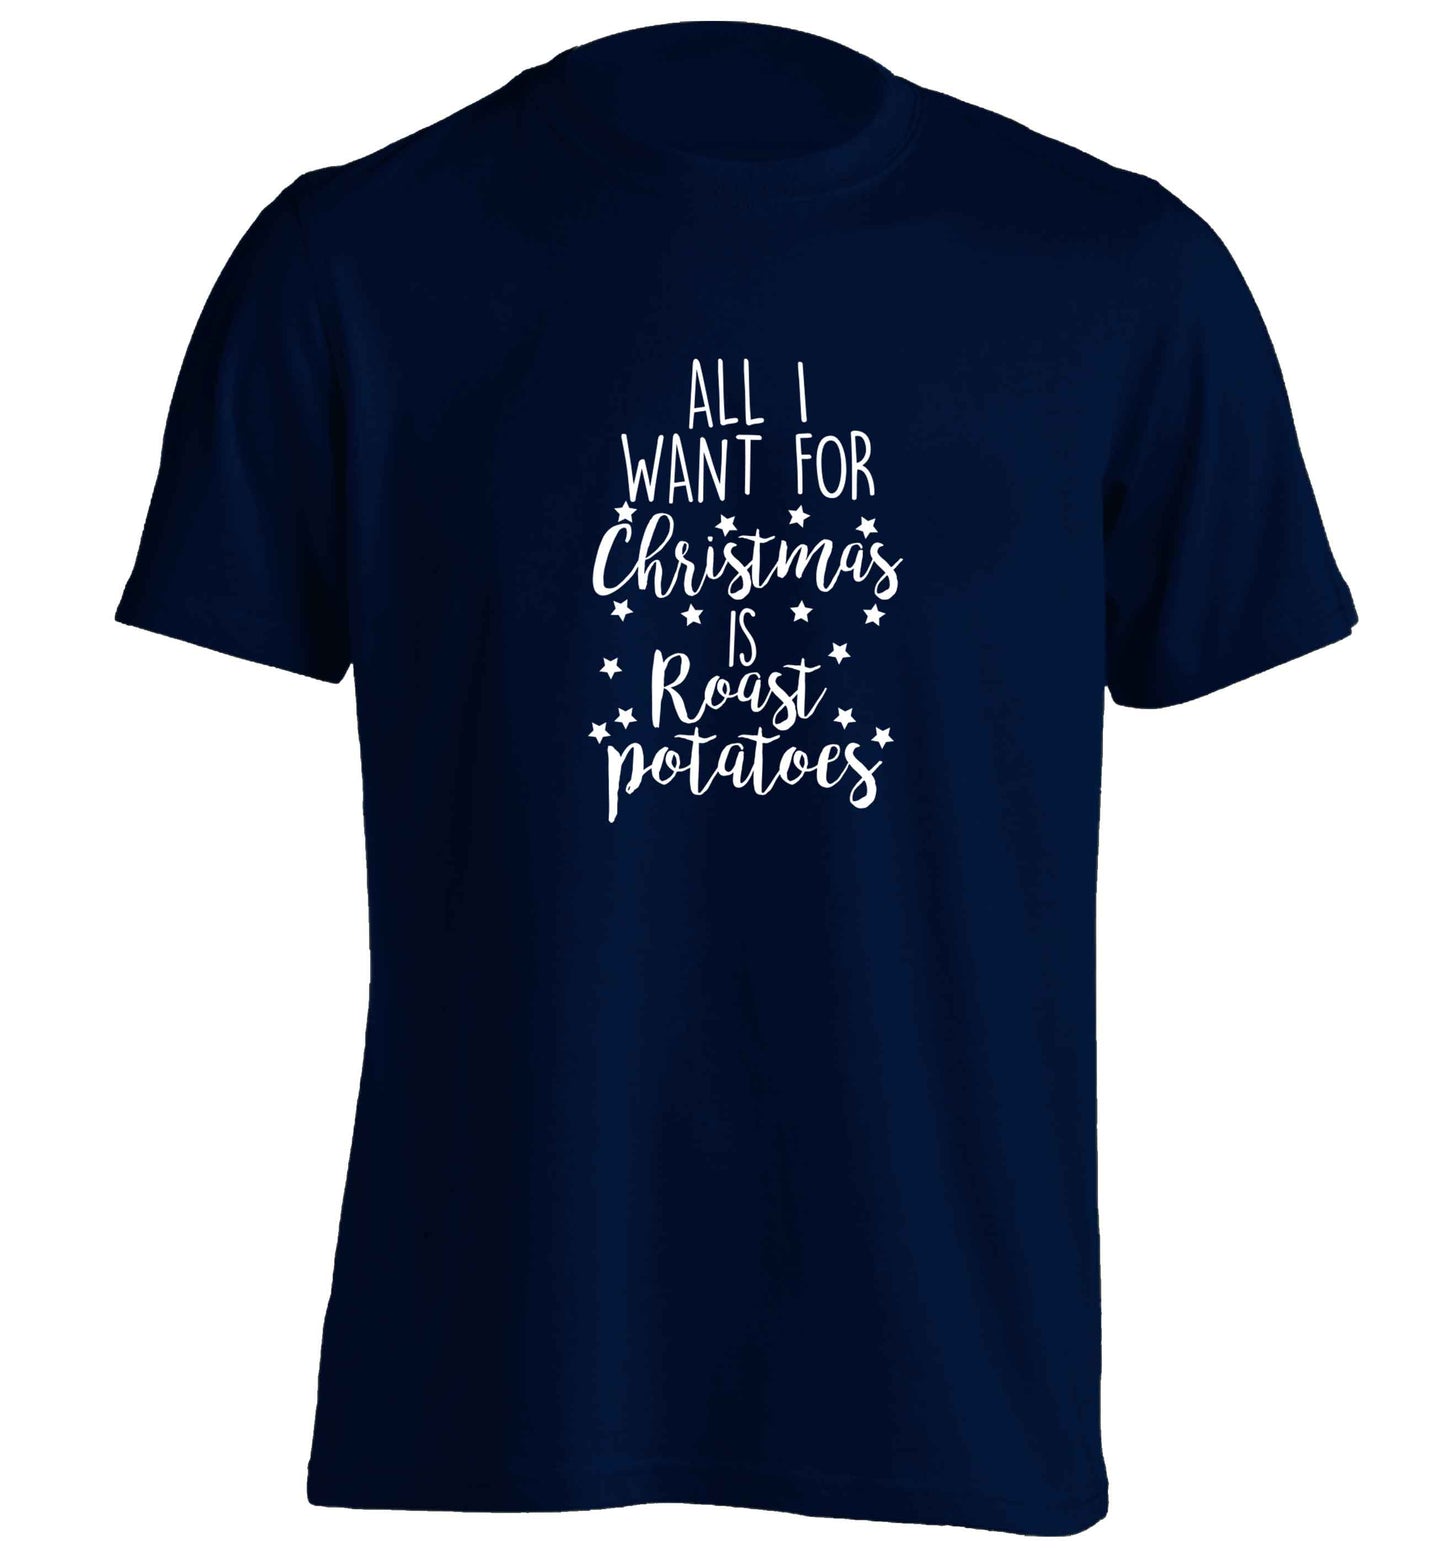 All I want for Christmas is roast potatoes adults unisex navy Tshirt 2XL